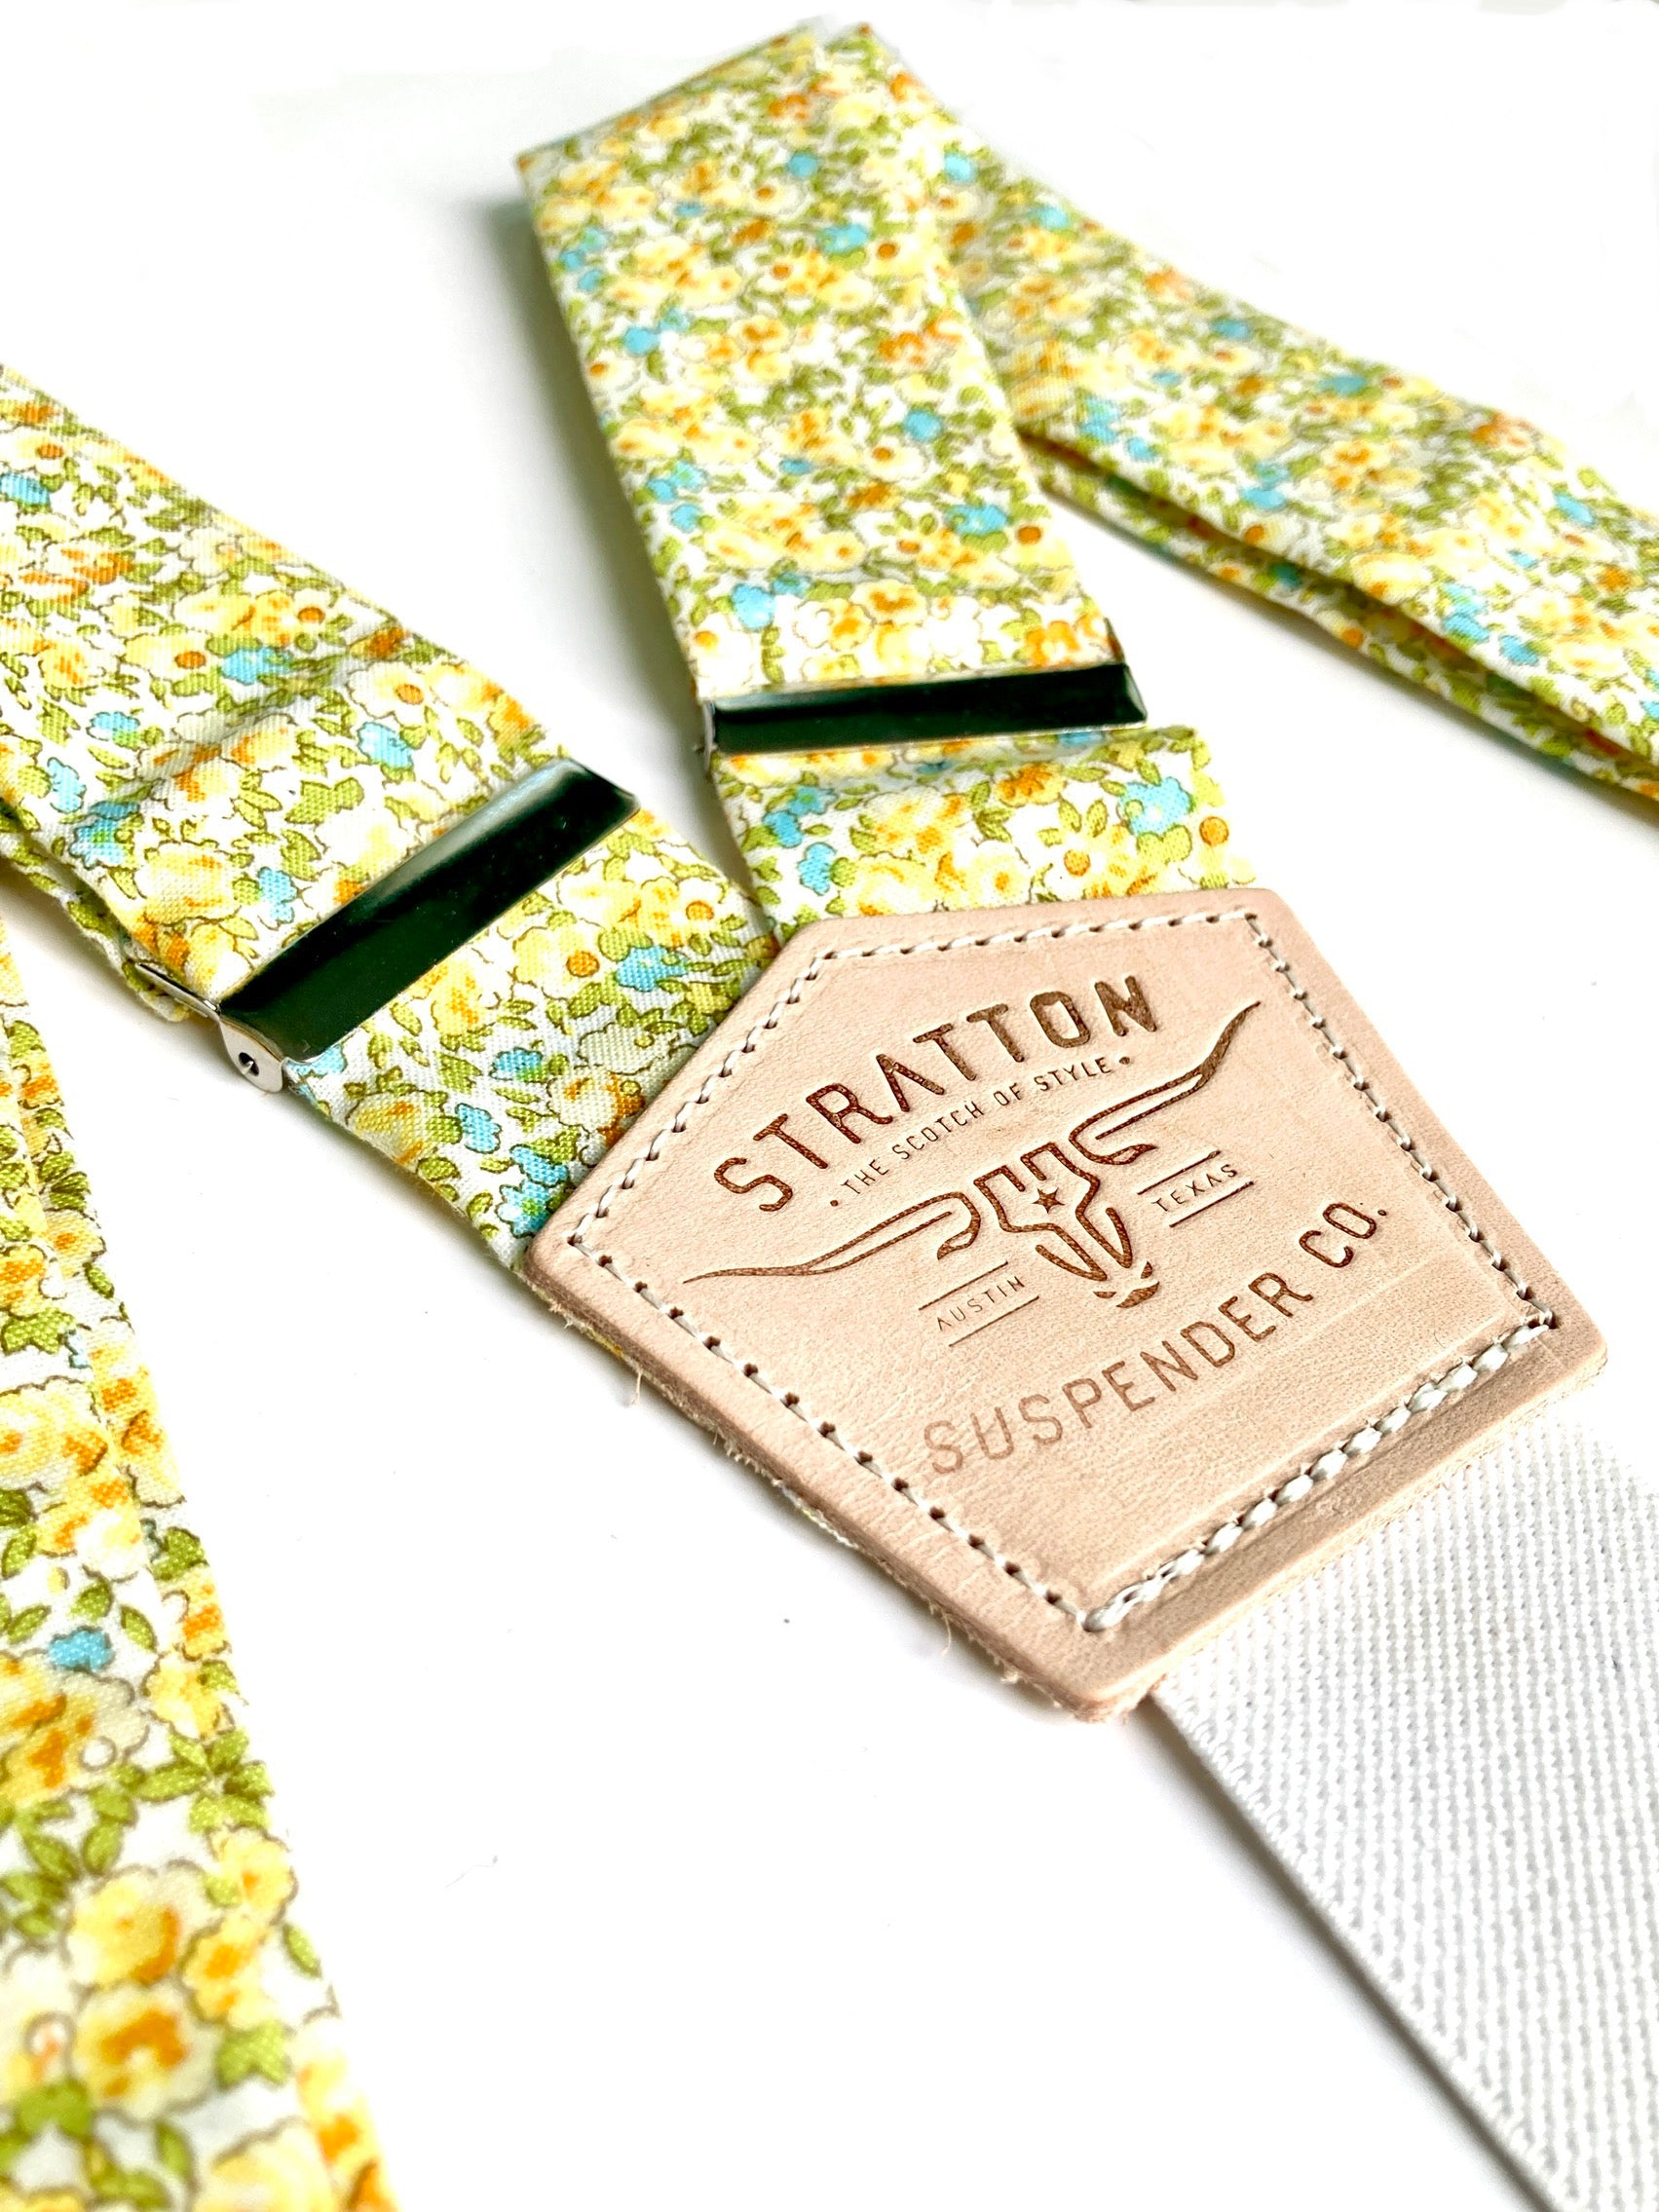 Stratton Suspender Co. Straps in Summertime Yellow Floral